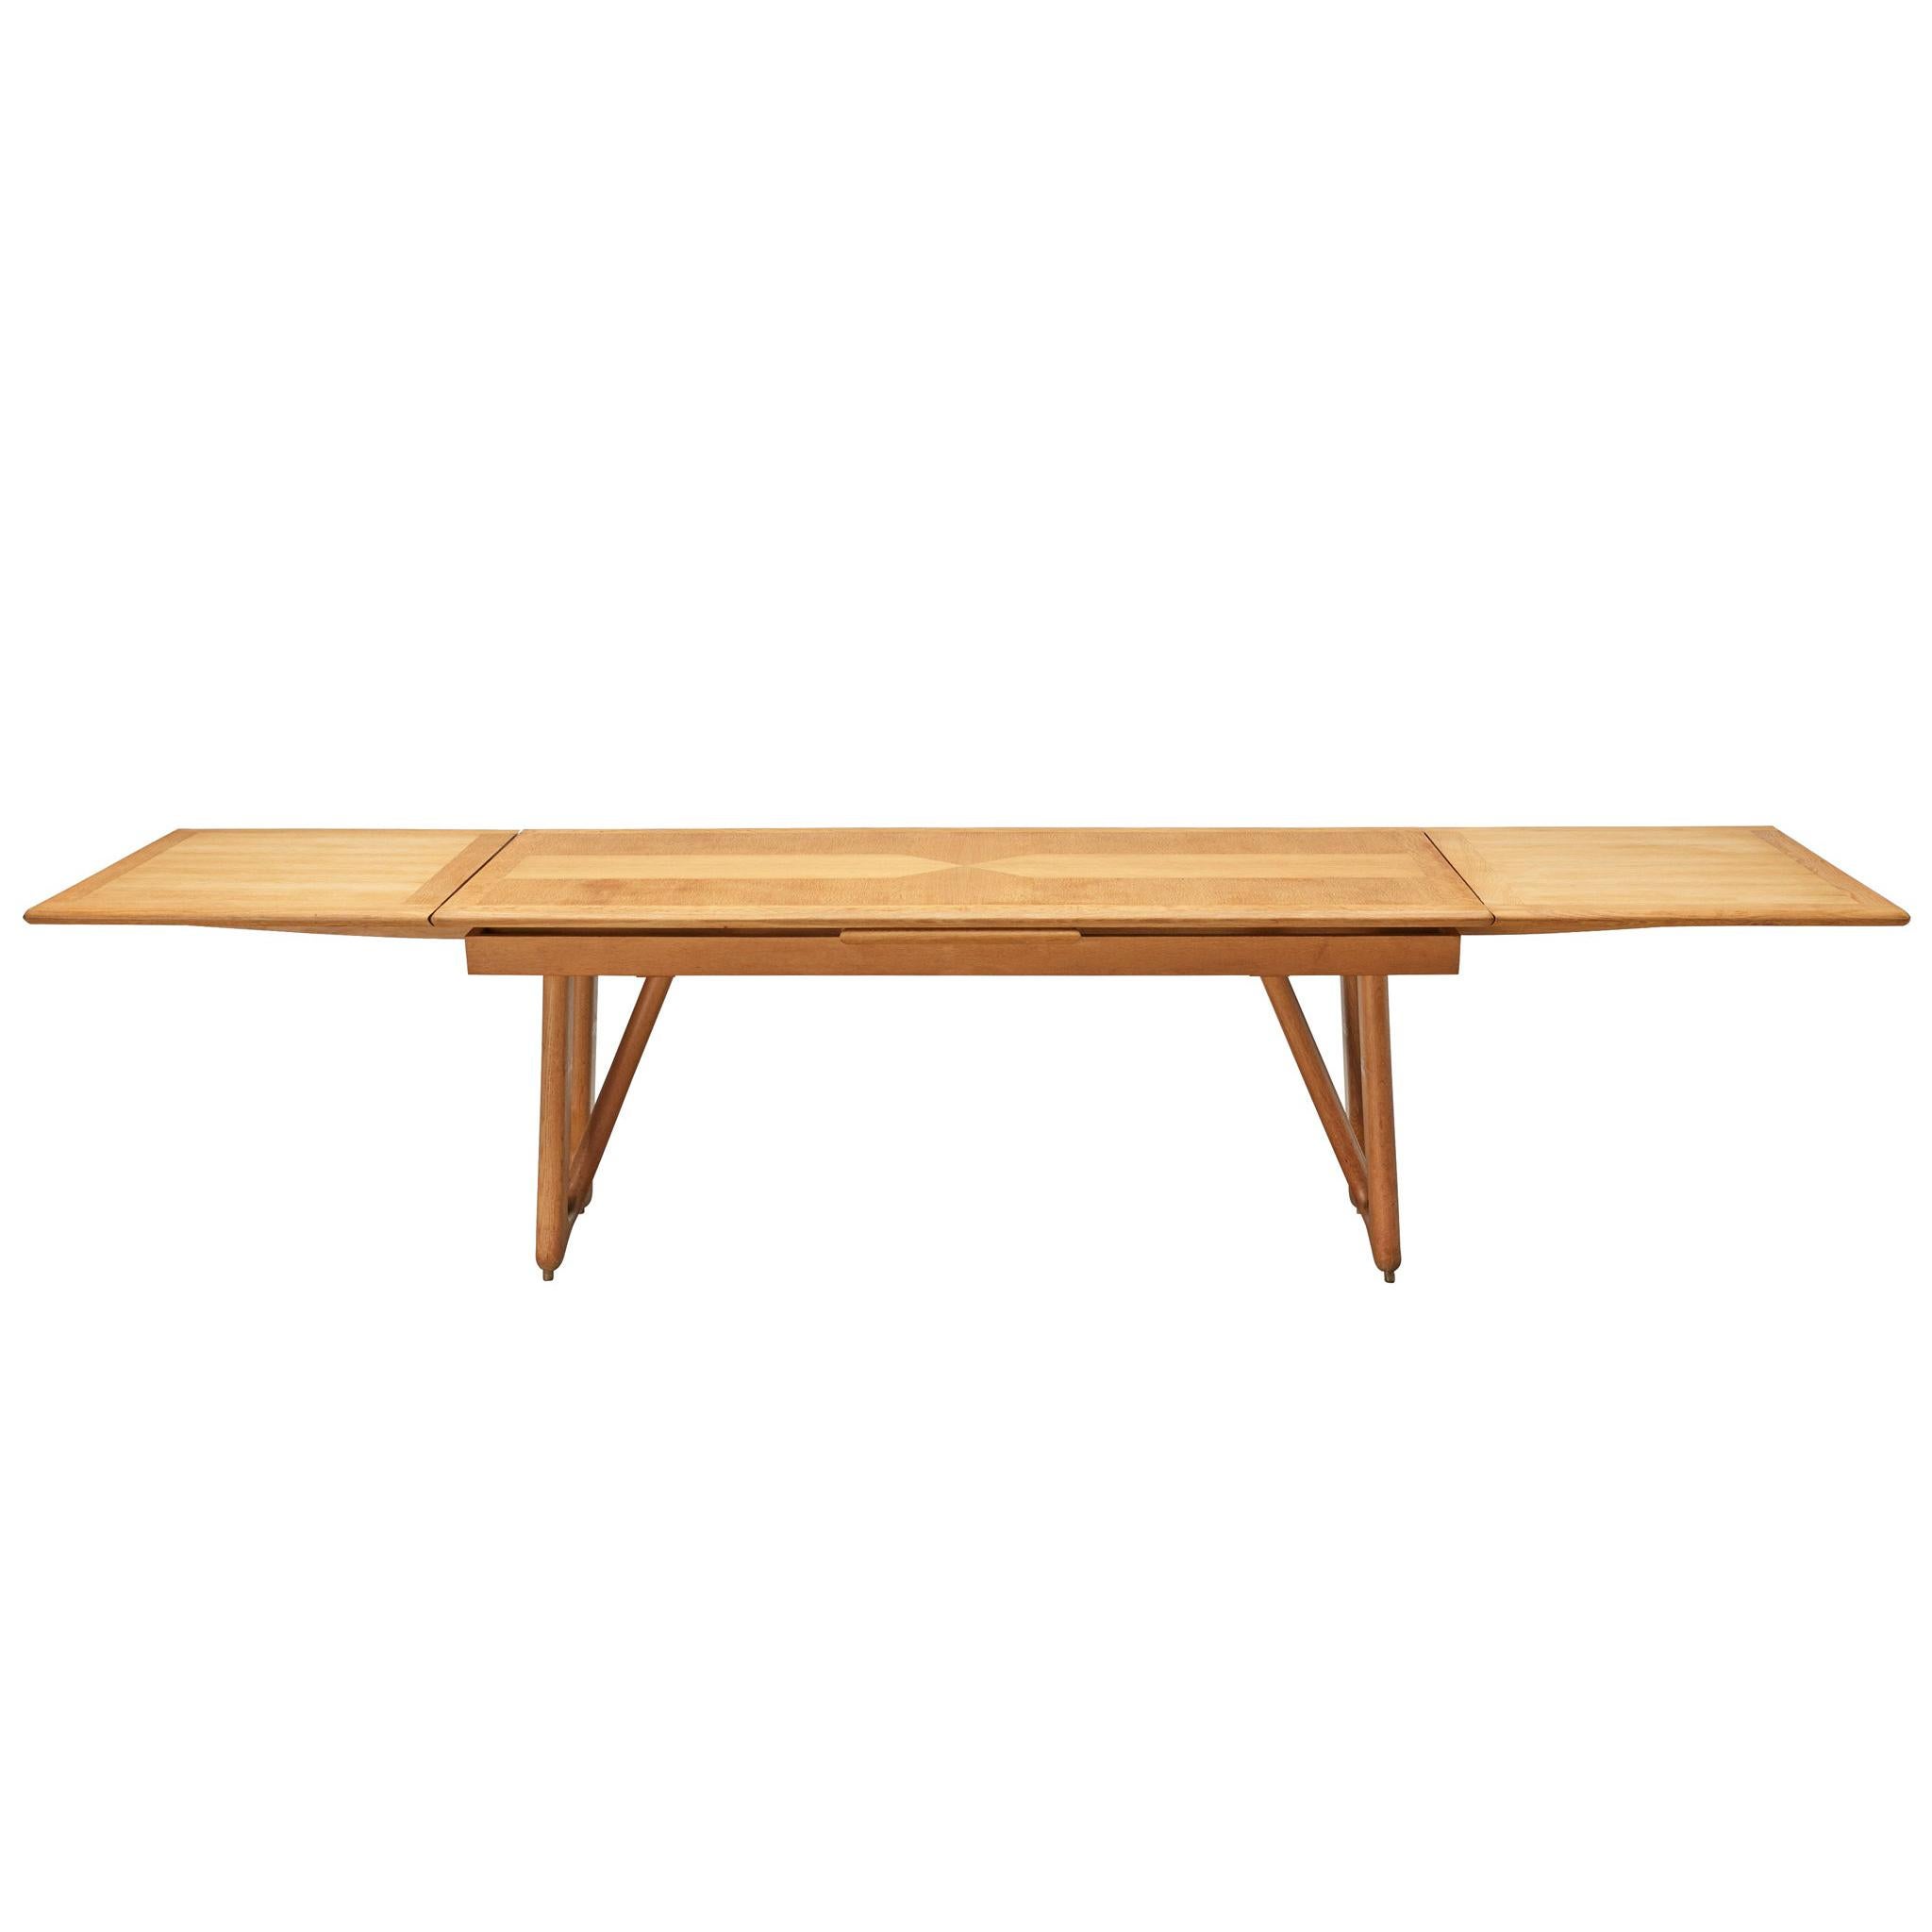 Guillerme et Chambron 'Petronille' Dining Table 